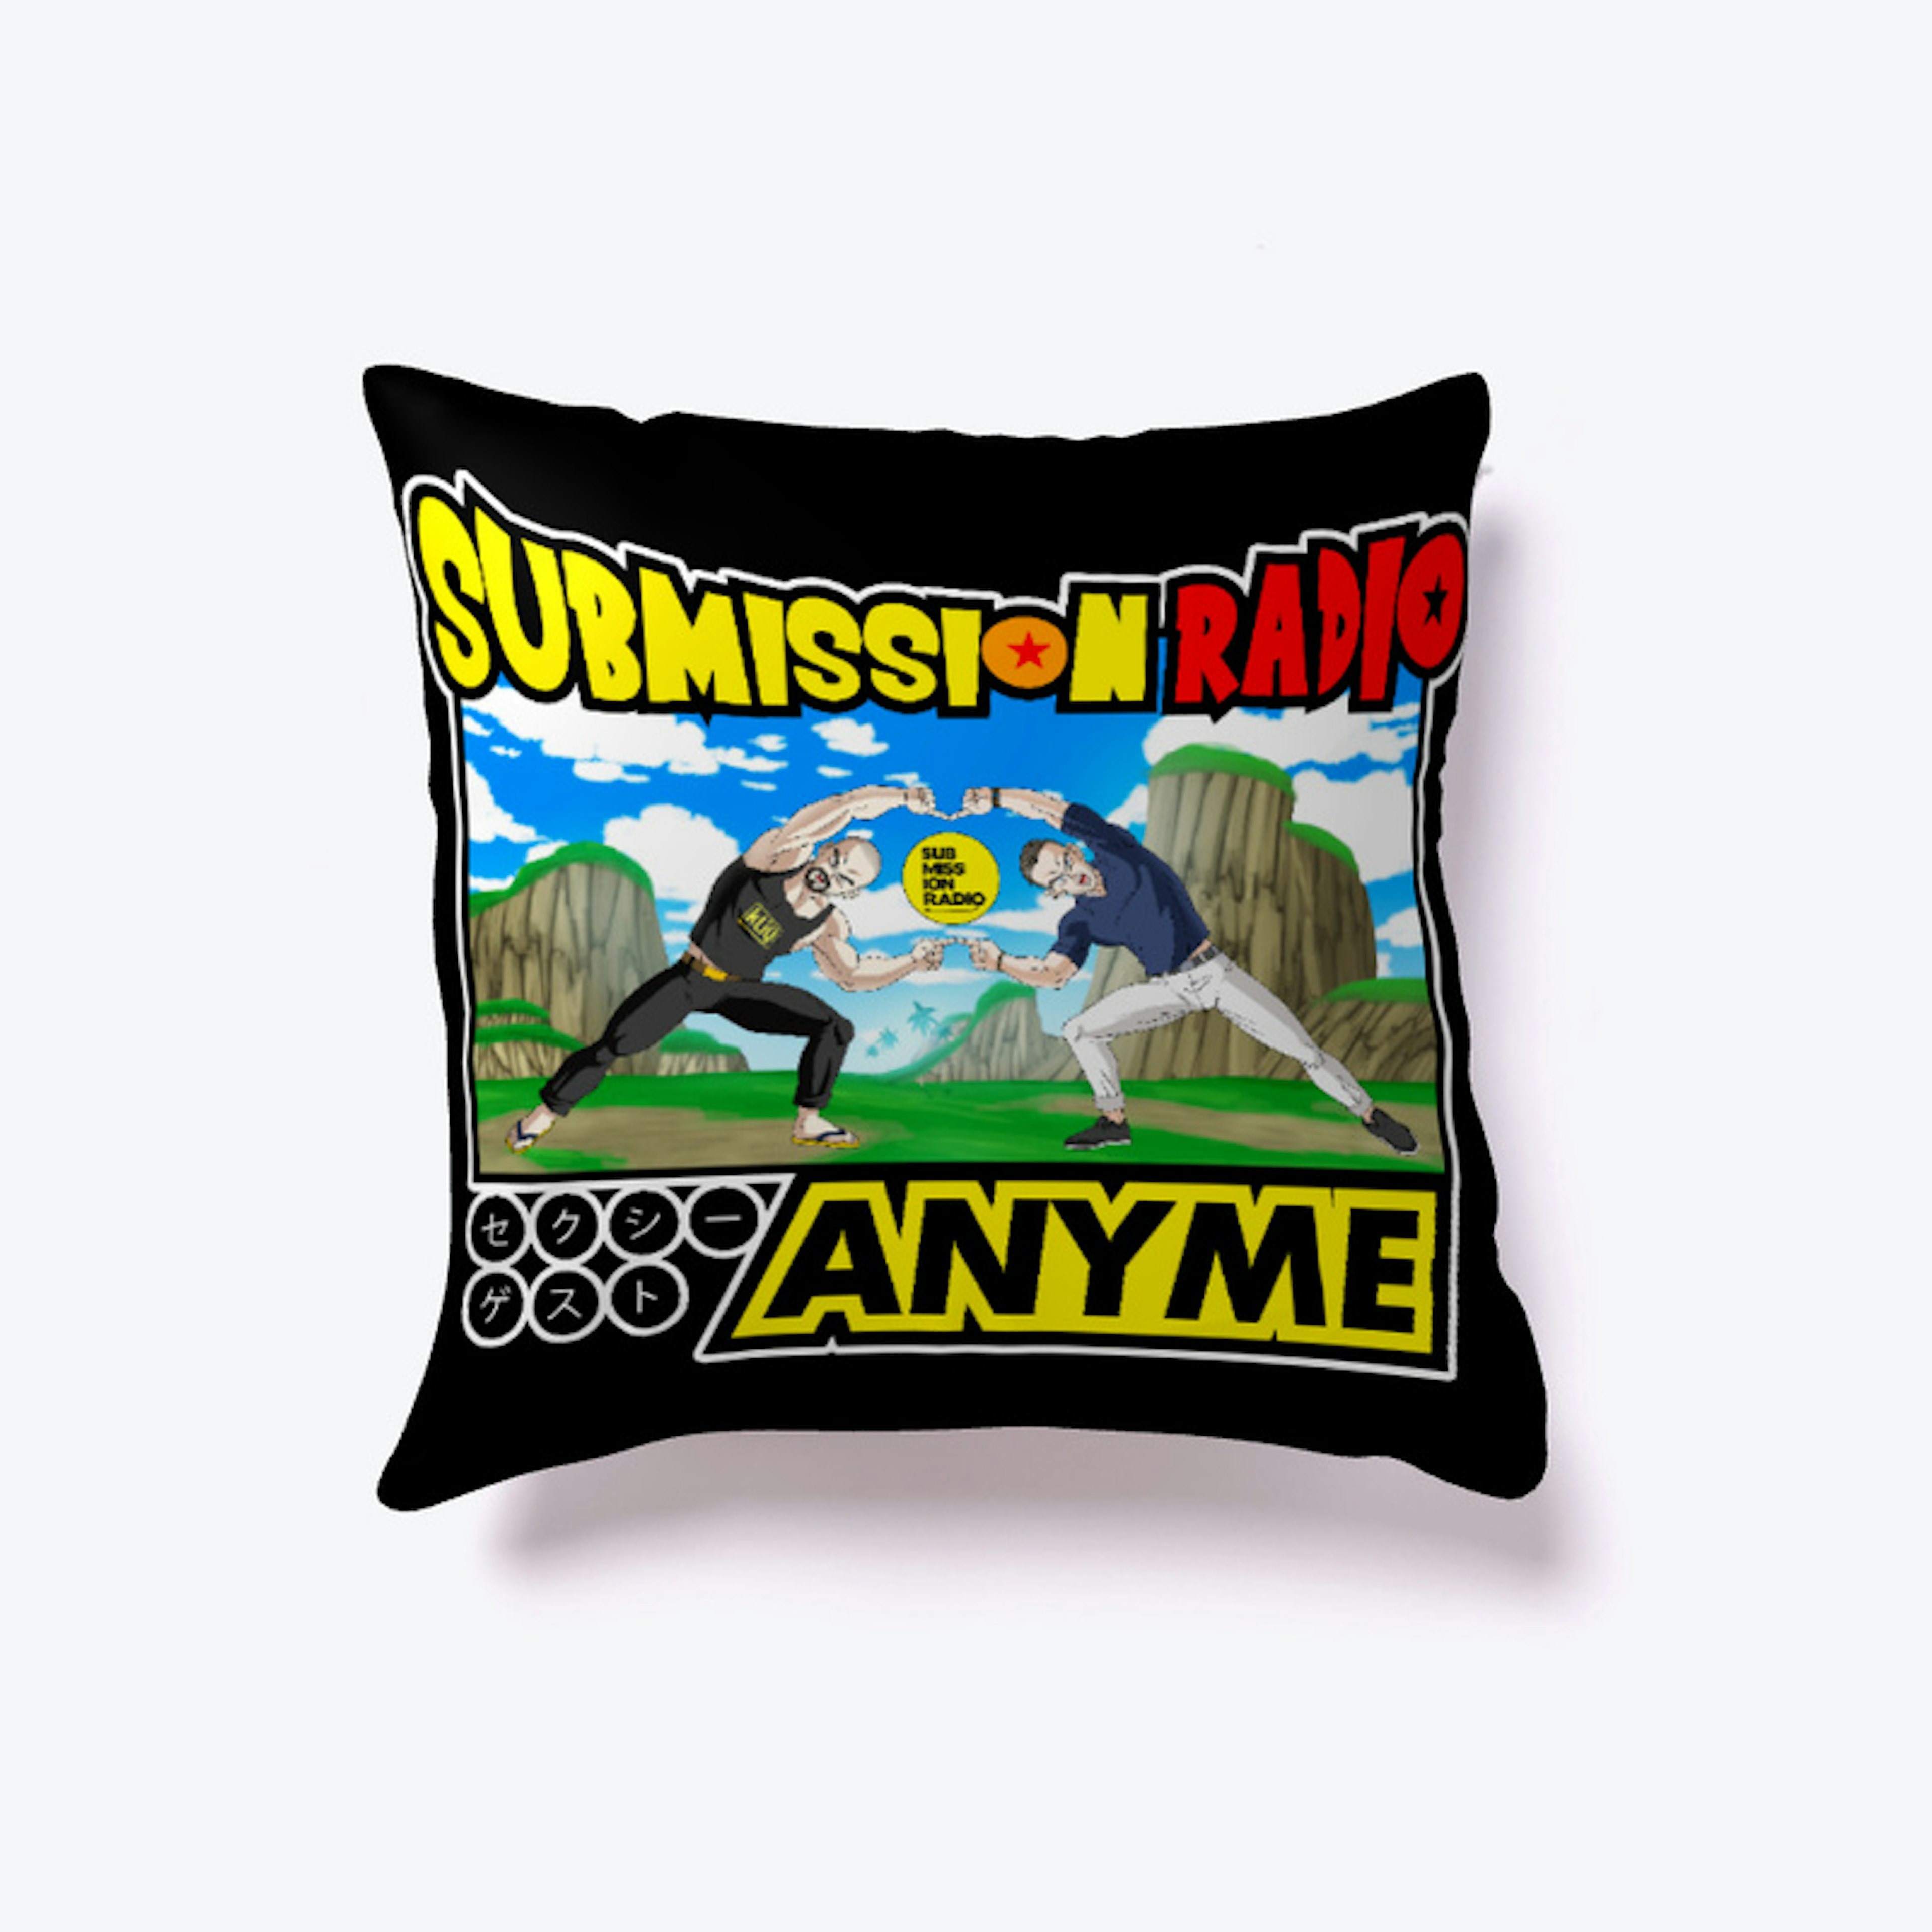 Submission Radio Anyme Apparel